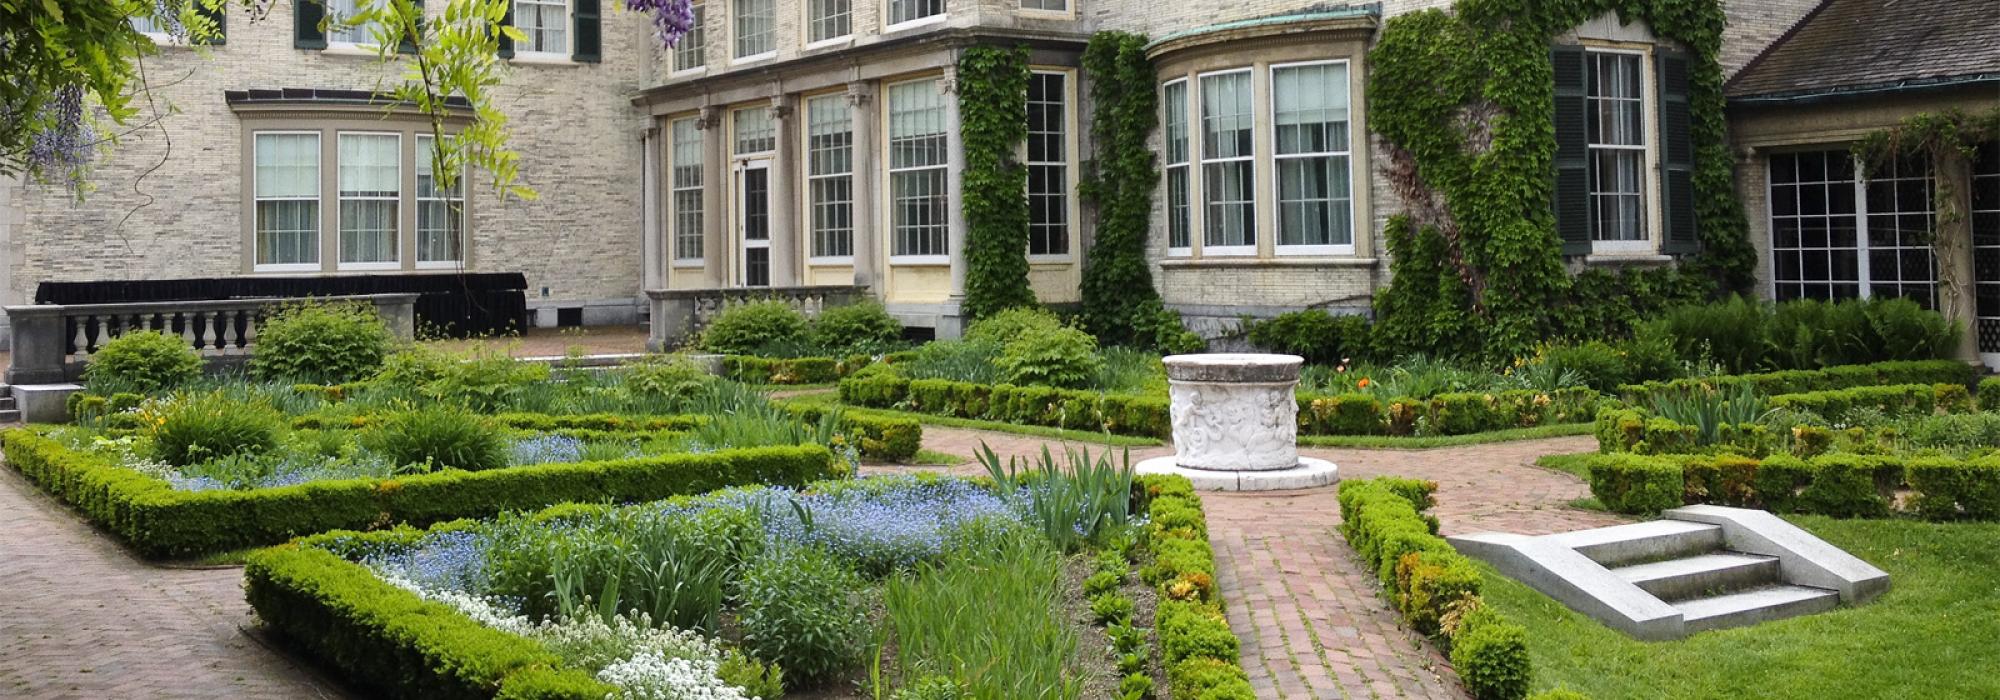 George Eastman House, Rochester, NY